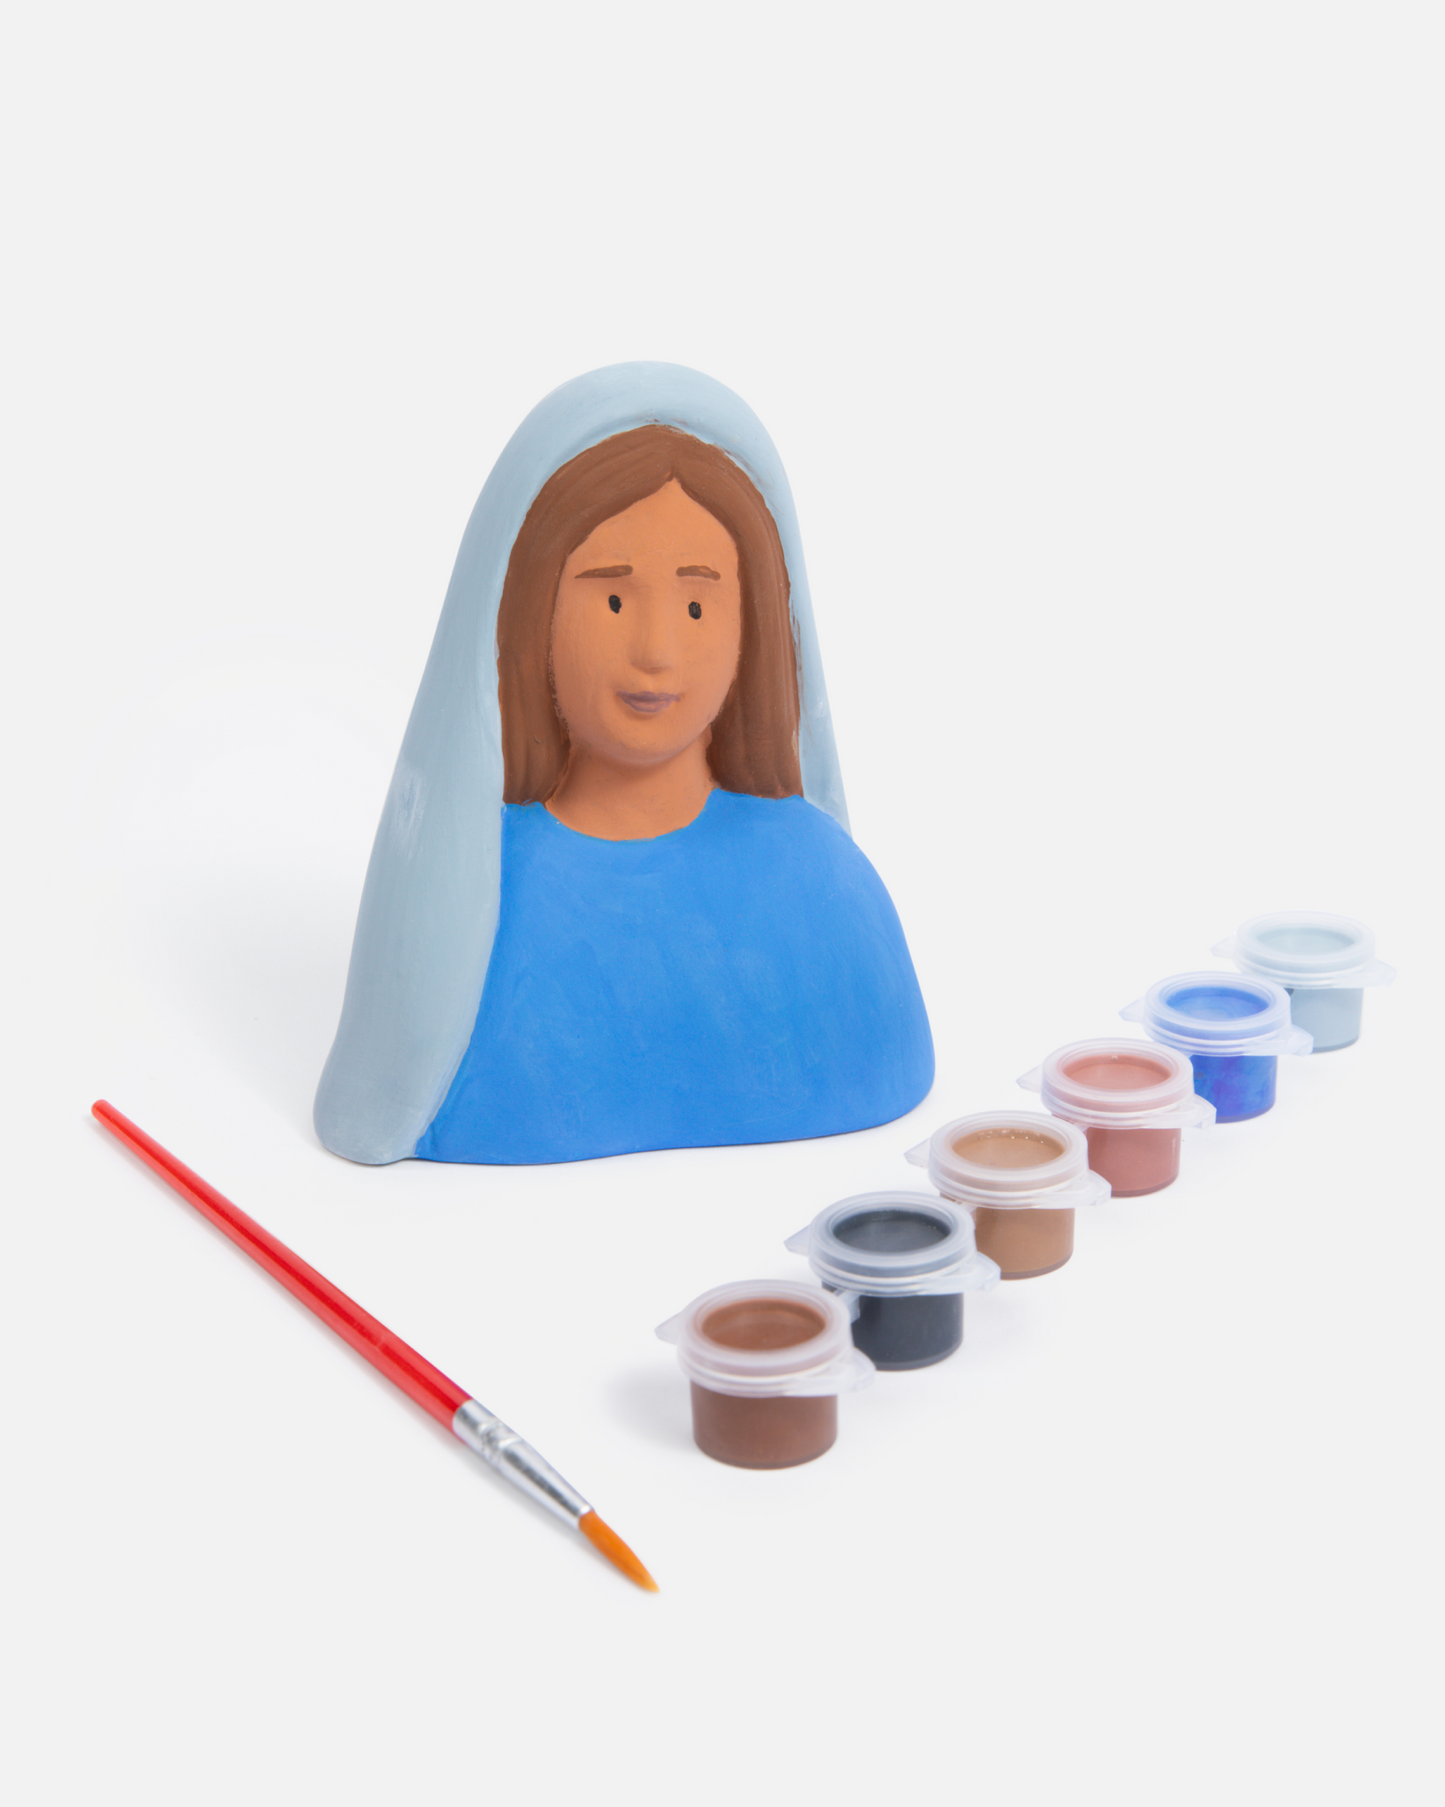 Paint Your Own Ceramic Kits